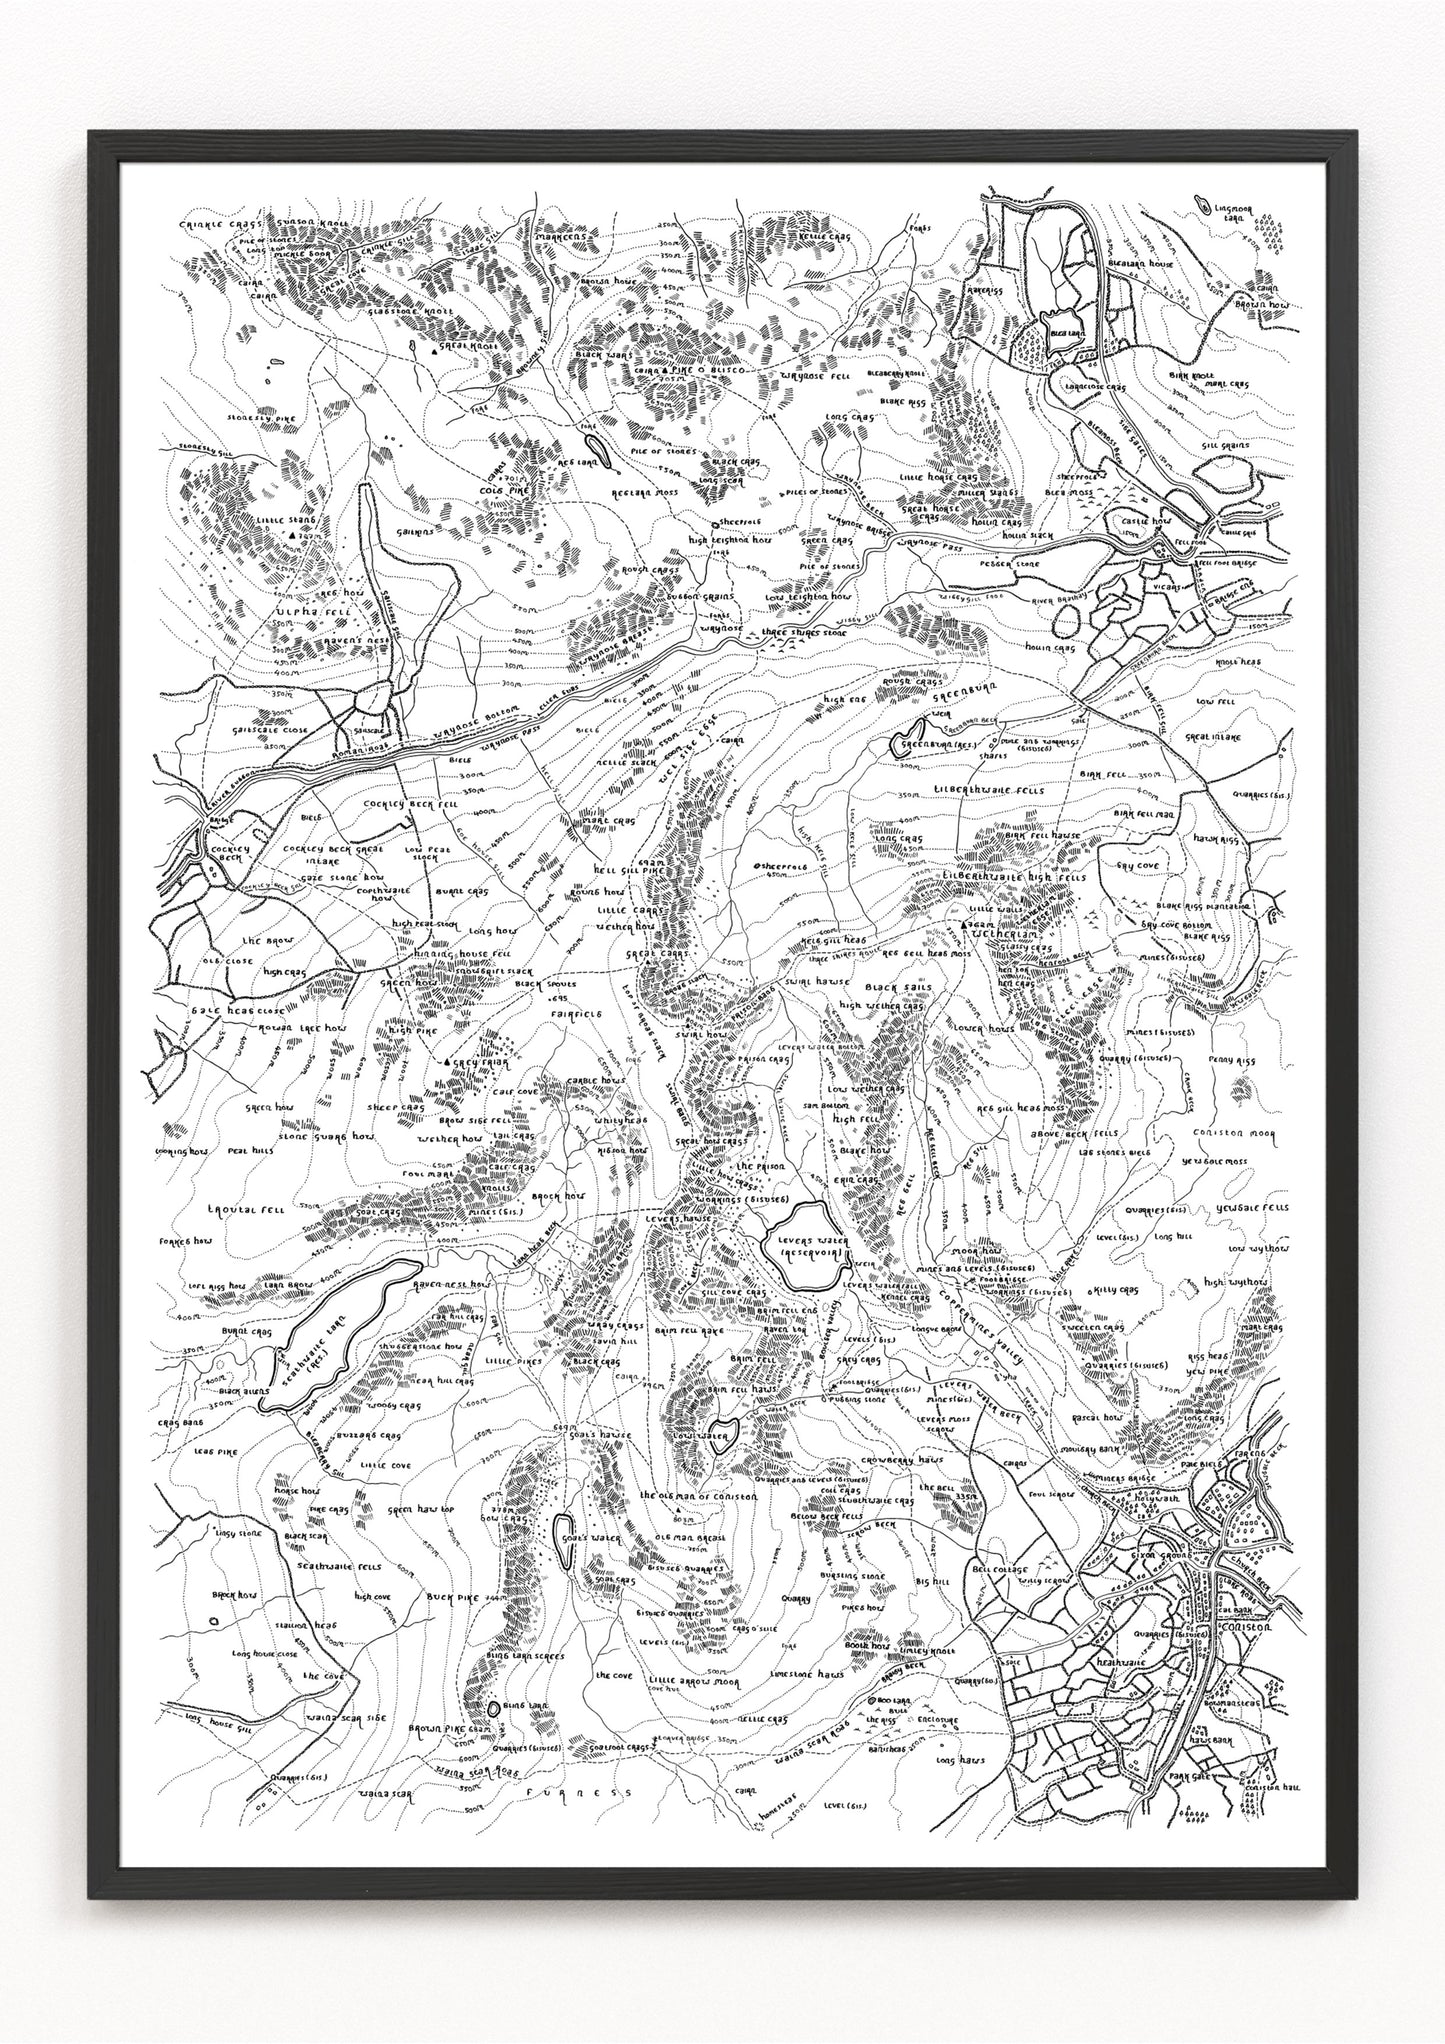 THE CONISTON FELLS | The Lake District | Topographic Map | Hand Drawn | 1:25,000 Scale Drawing